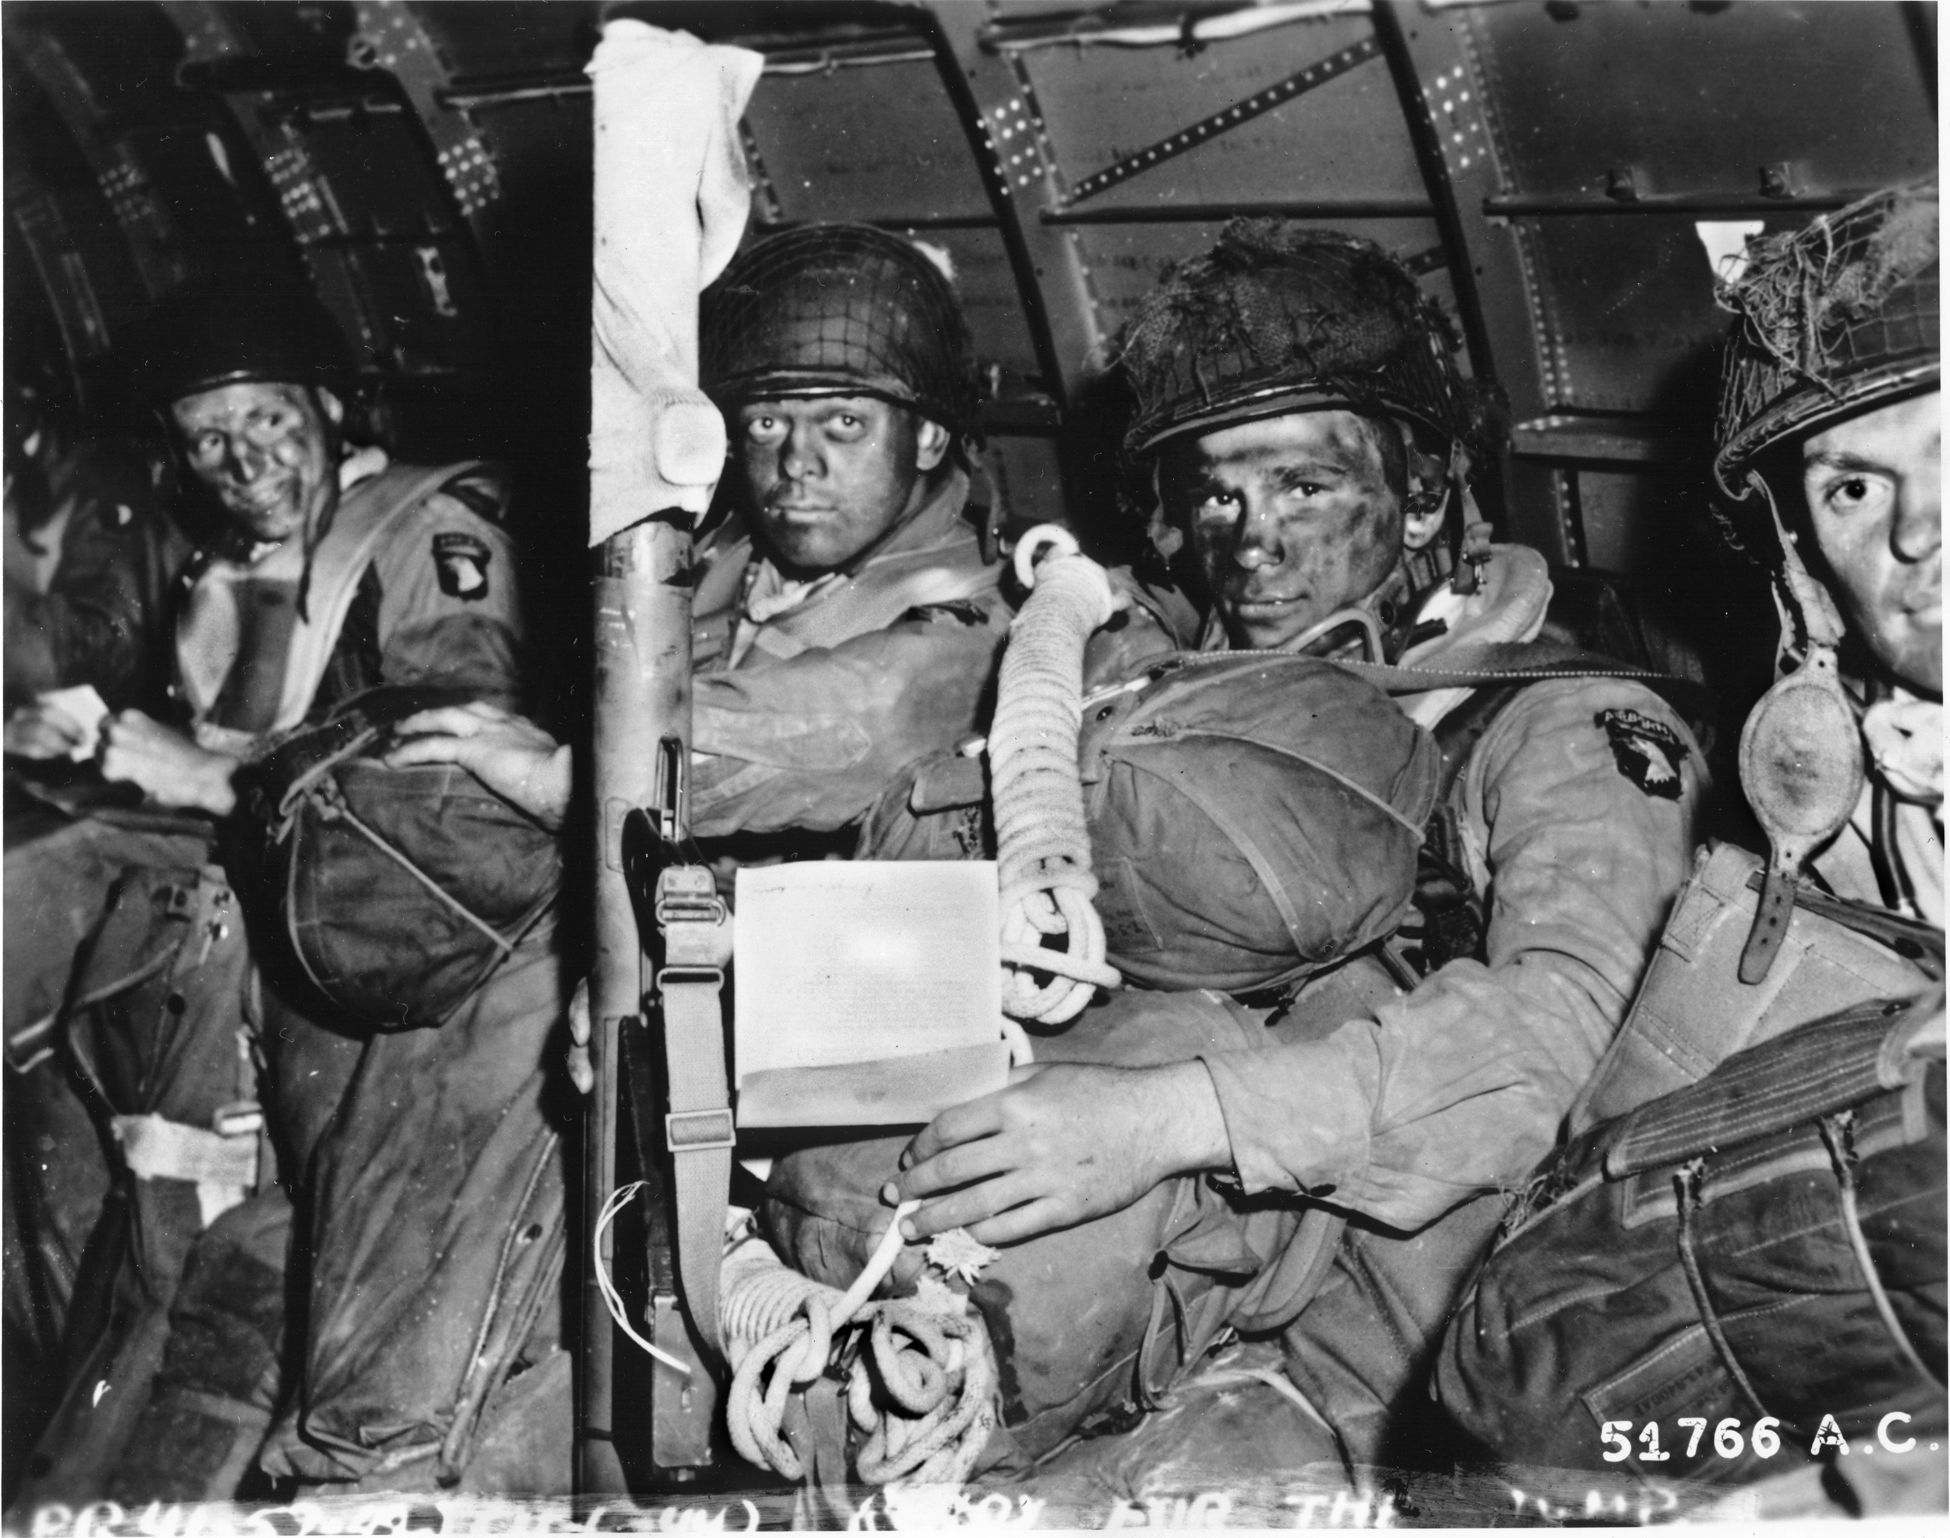 With blackened faces, a “stick” of 101st Airborne troops prepare to depart England. The bazookaman in front holds a copy of Eisenhower’s inspirational message for Operation Overlord.